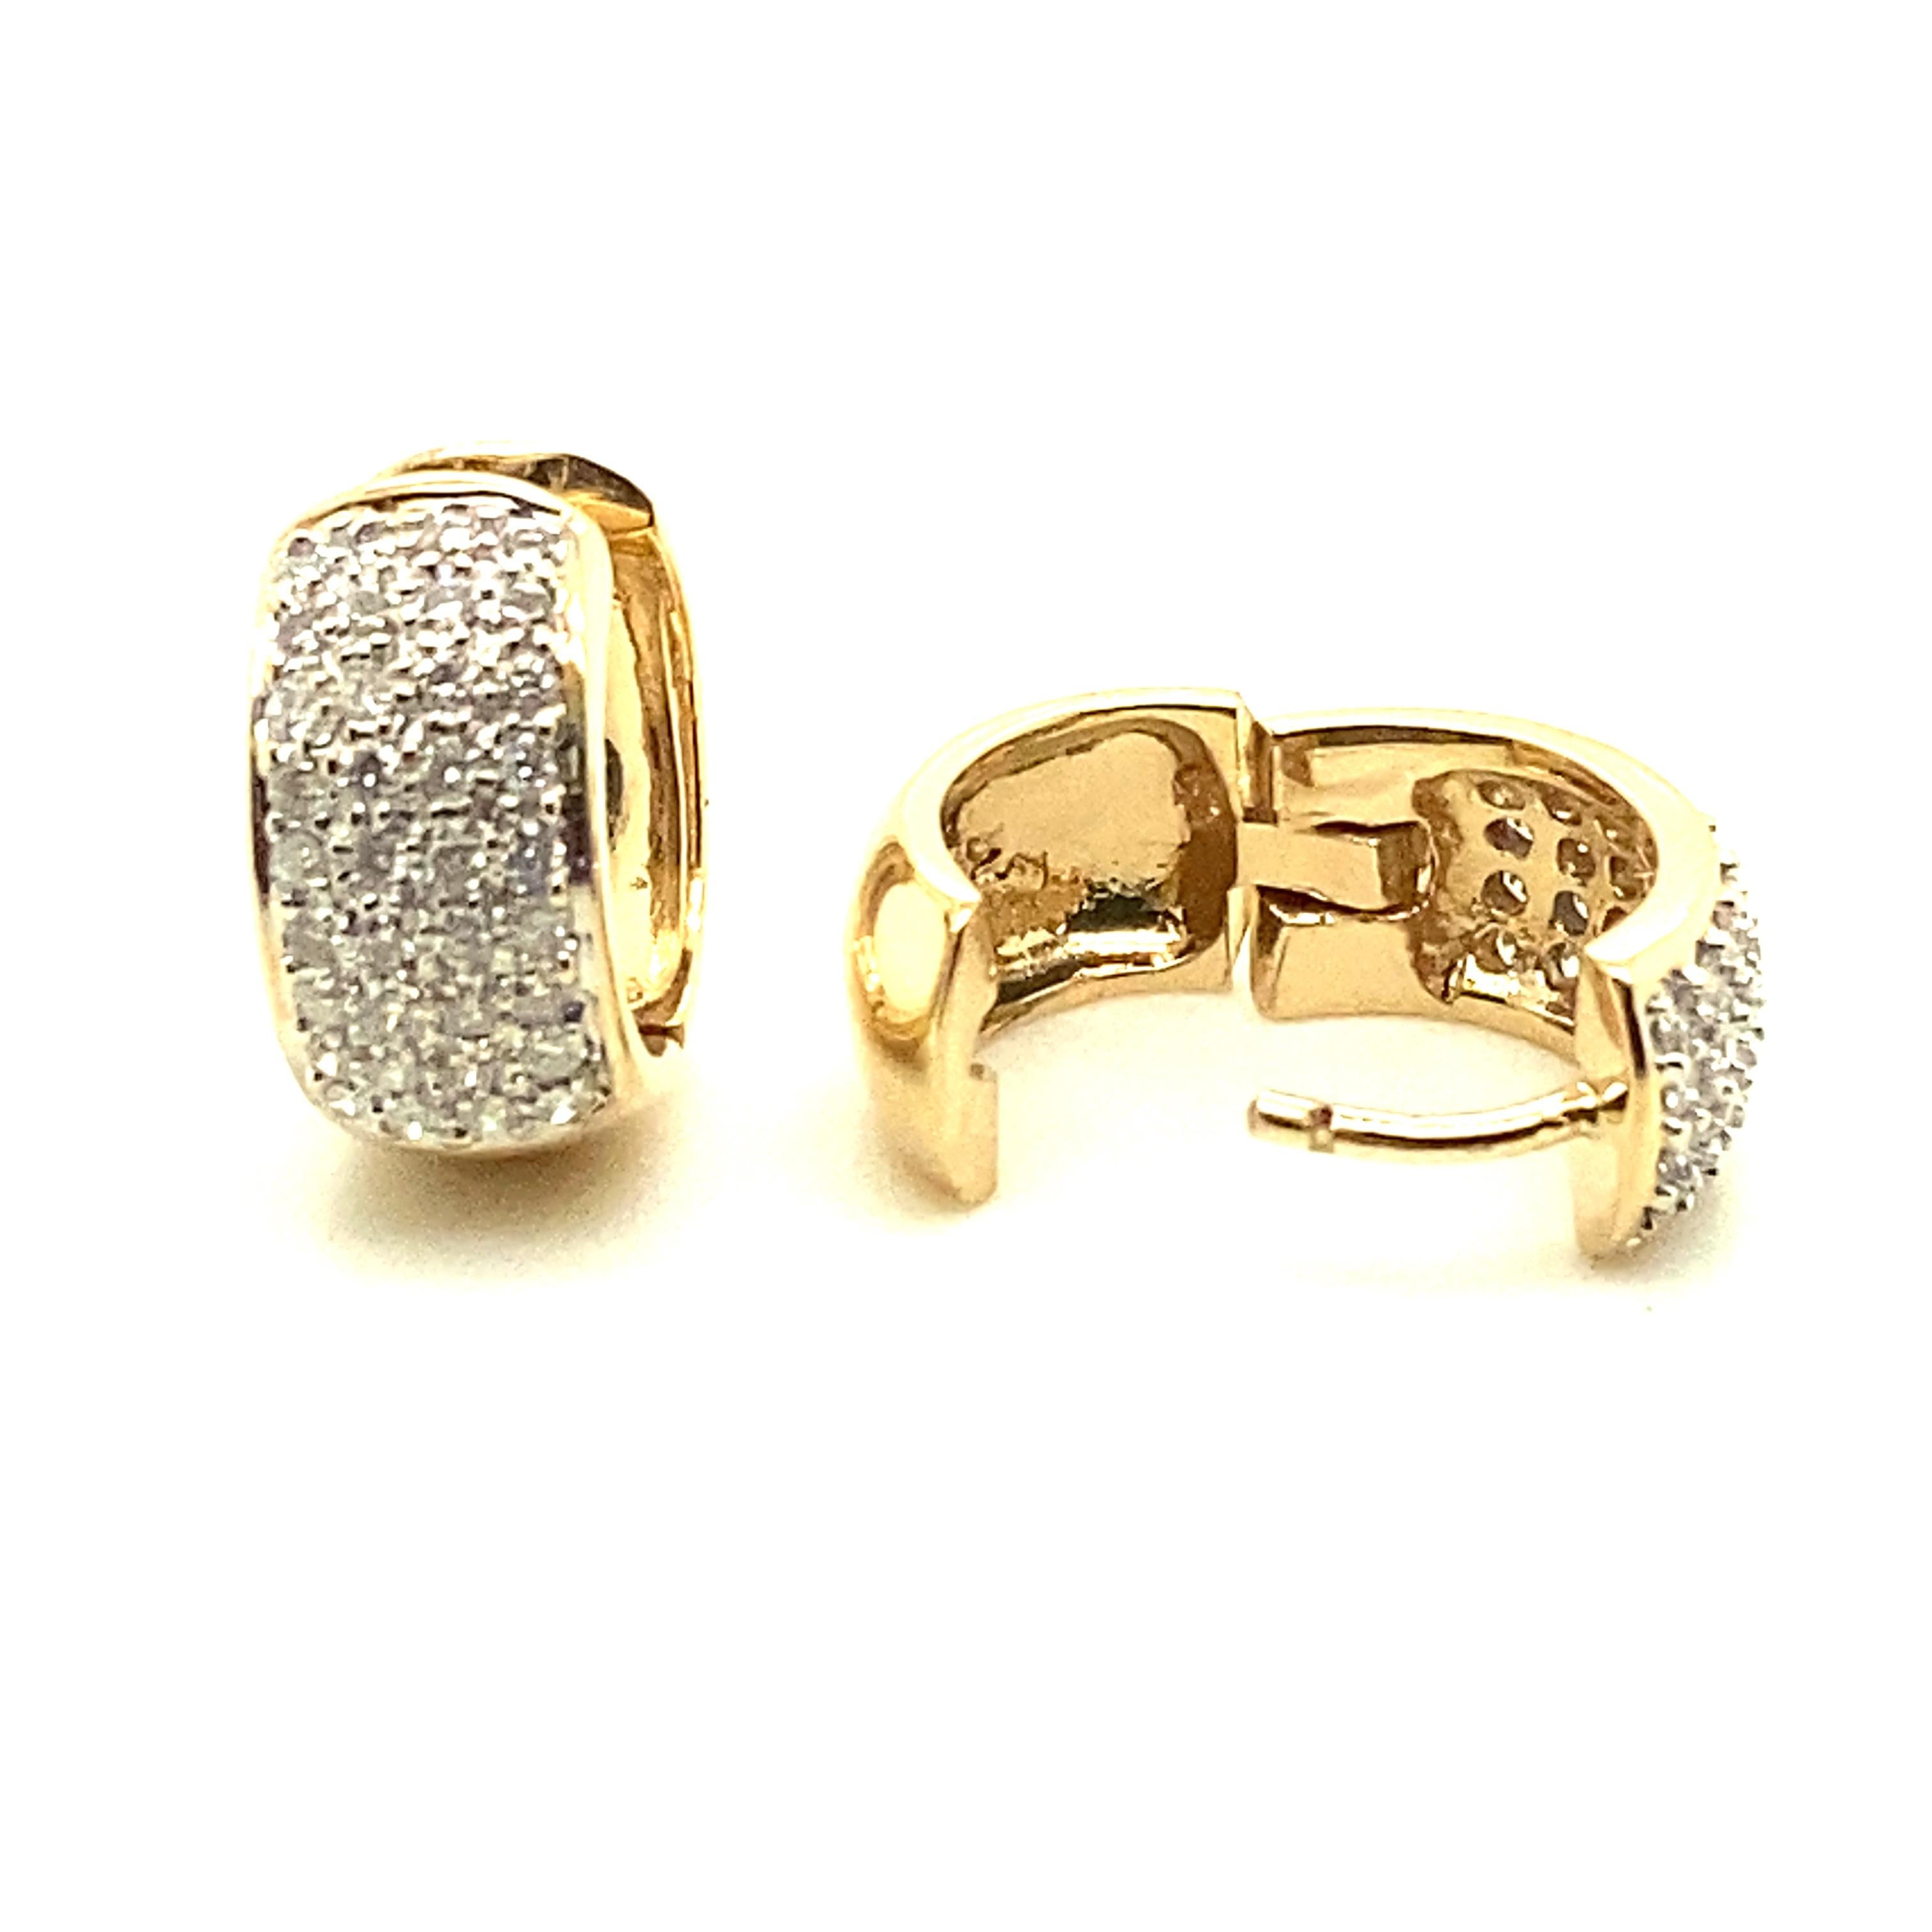 14kt yellow gold .75 total carat pave' set diamond earrings. The earrings are huggie style so it looks like one continuous loop from your earlobe. The earrings measure 14.25mm high (just over .50 inch) by 7.03mm (just over .25 inches) wide. The